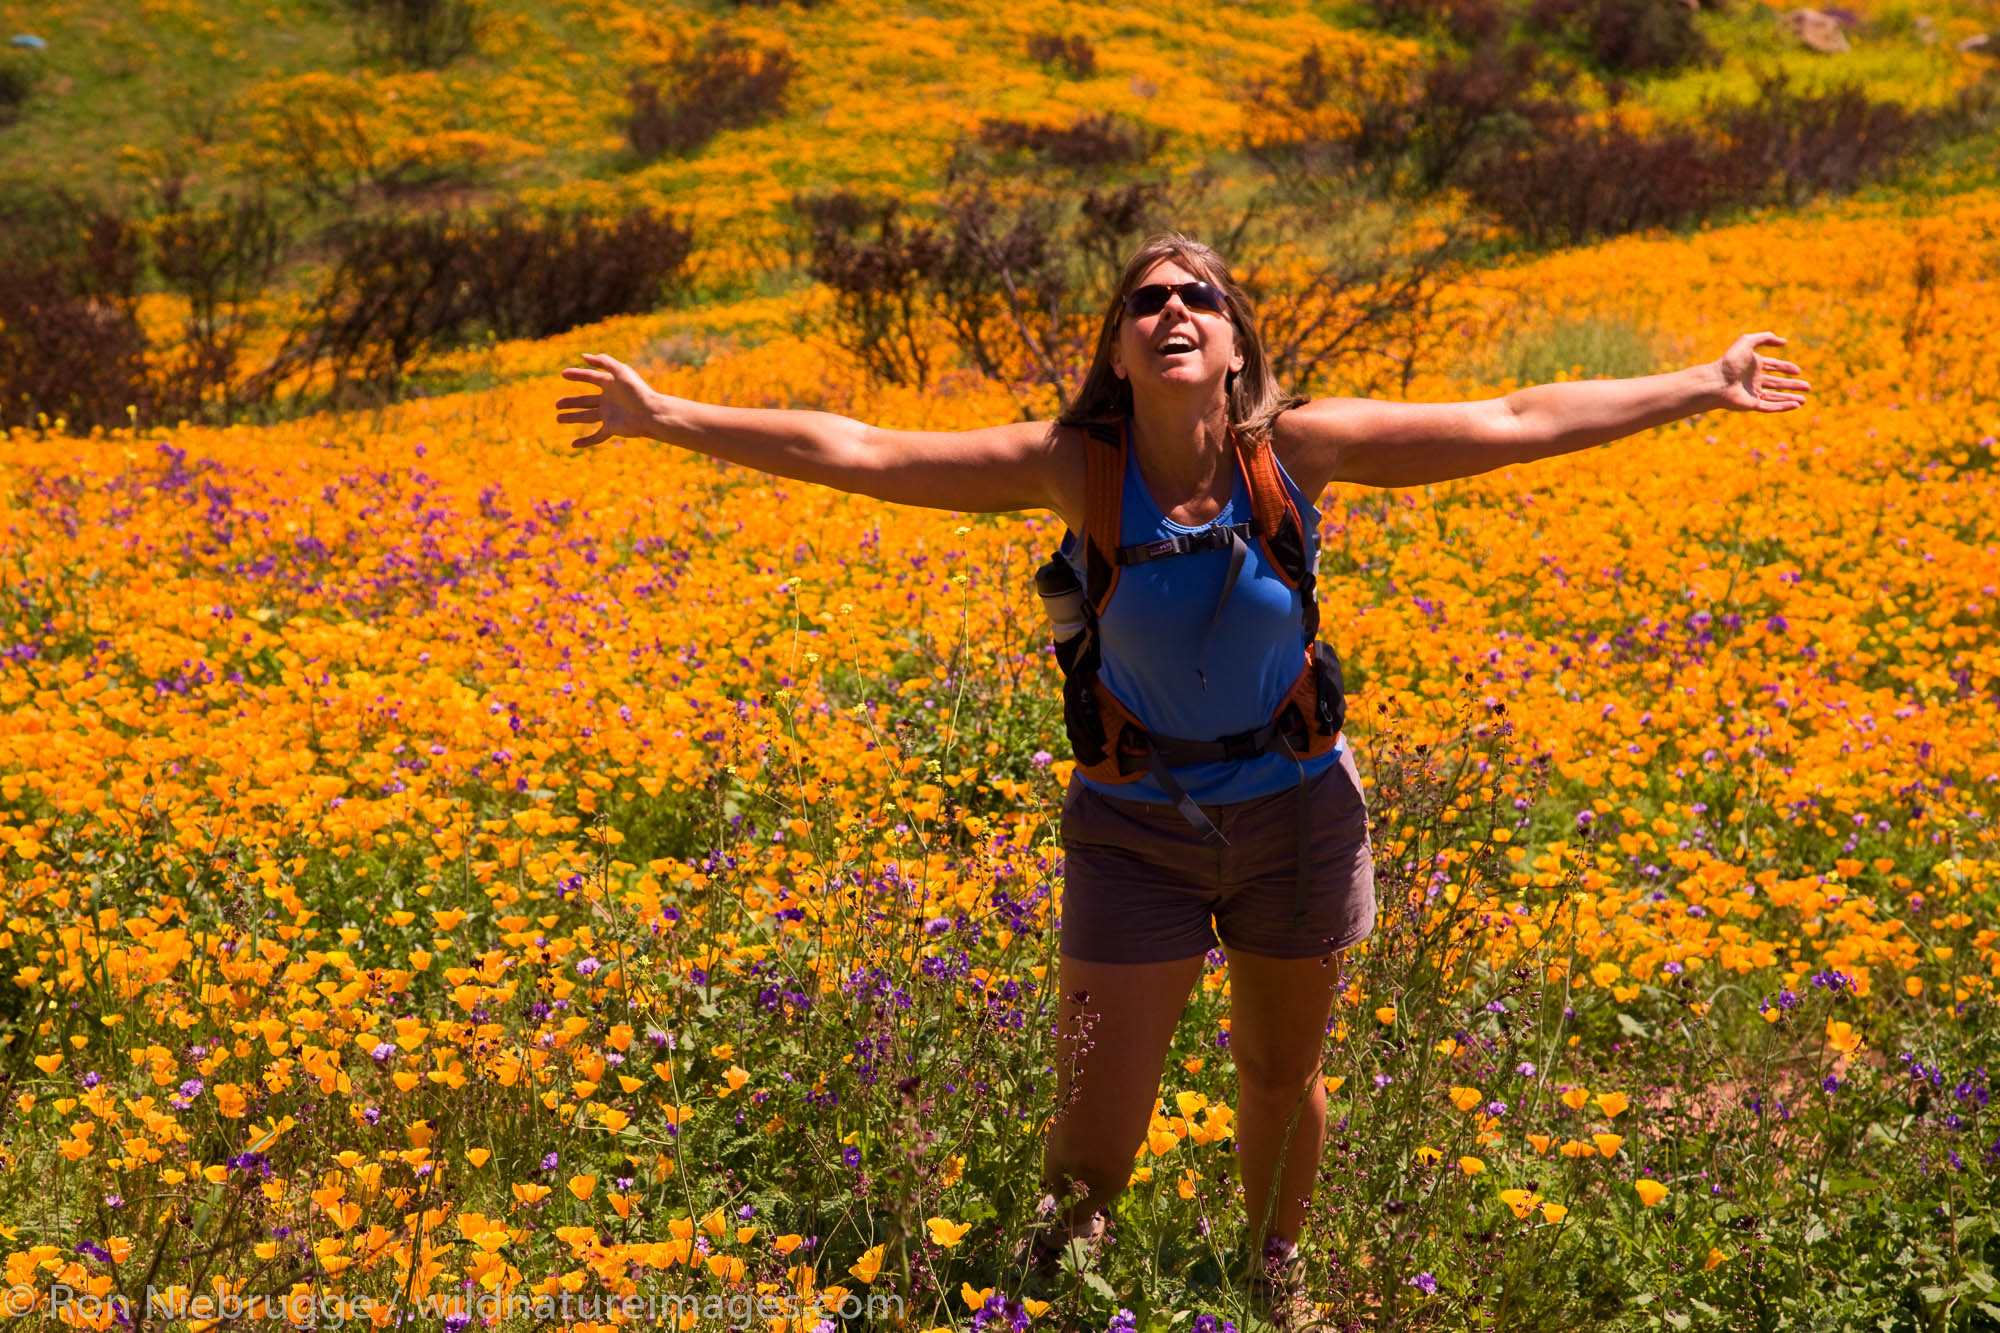 A hiker enjoying the wildflowers, primarily California Poppy (Papaveraceae: Eschscholzia californica) and Parry Phacelia (Hydrophyllaceae...